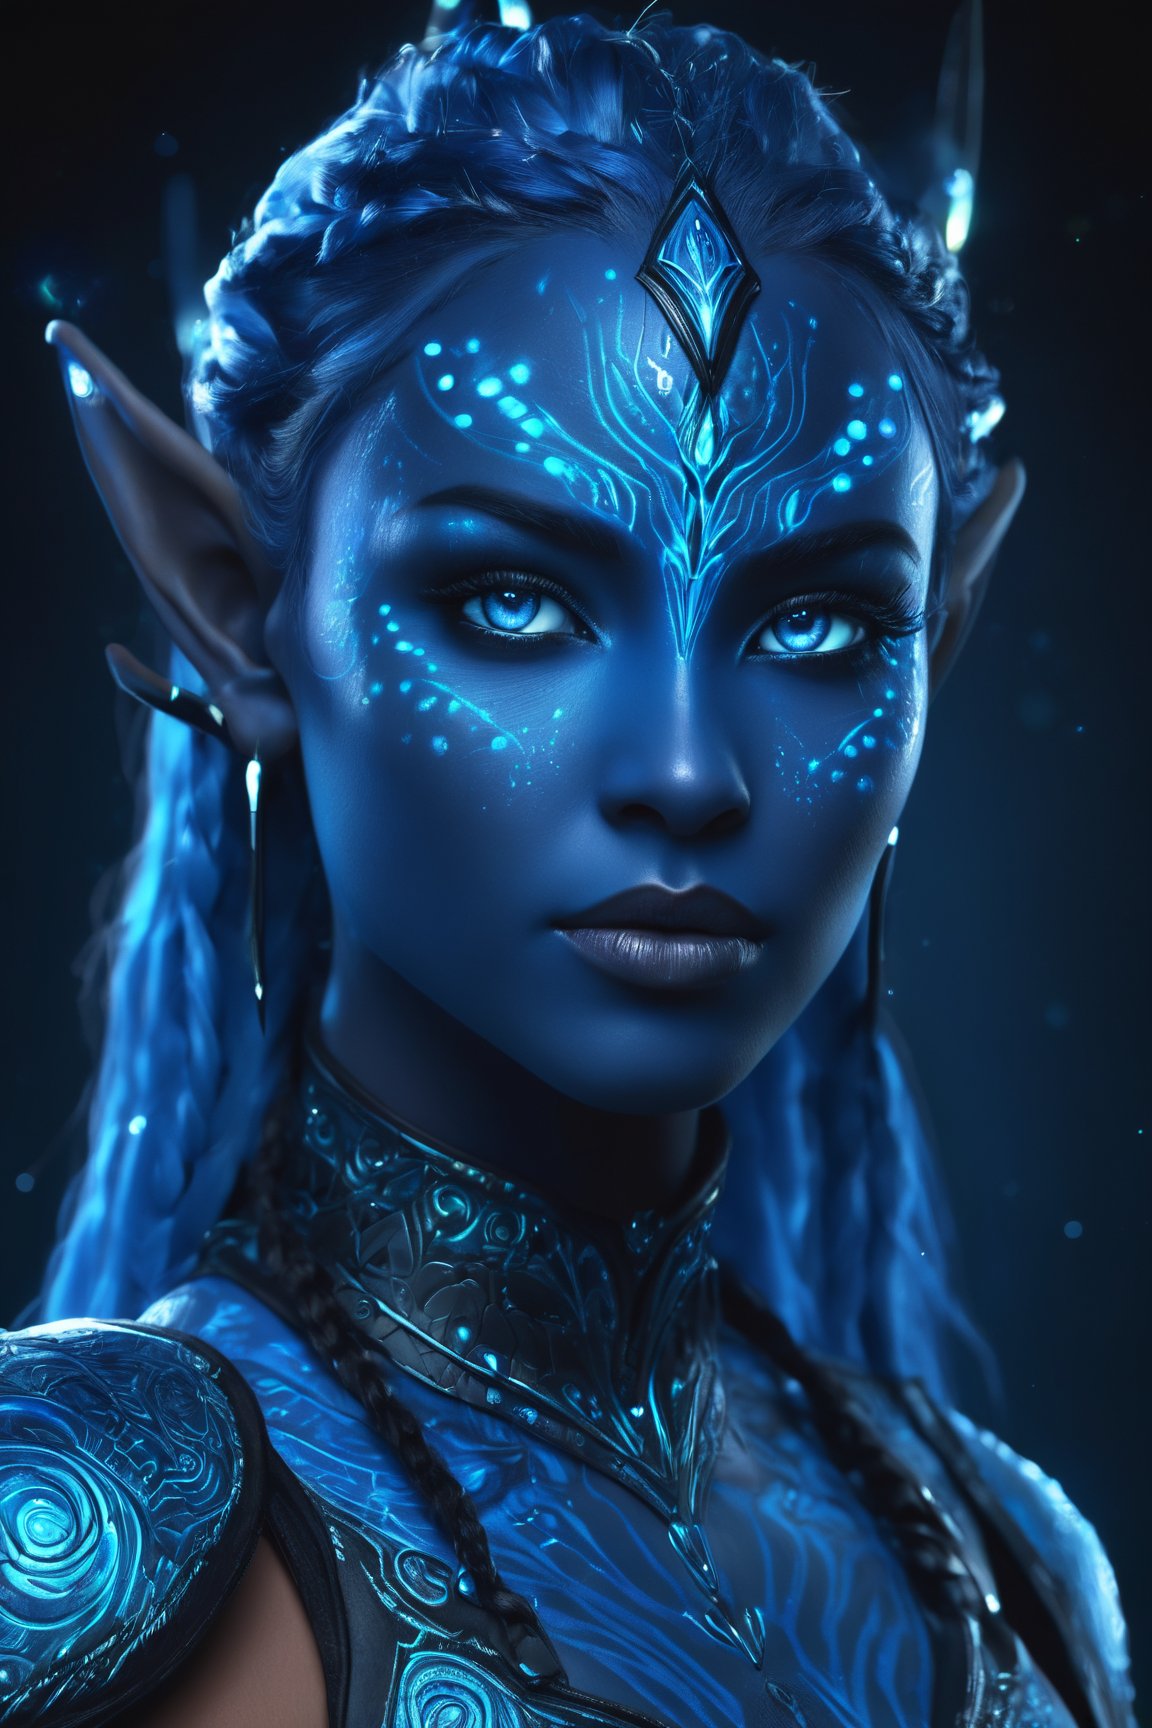 blue humanoid avatar with bioluminescent avatar markings dots and patterns on their skin. Pointed elf ears. avatar like hair,  hair colour black,  sparkling glowing blue eyes,  slightly shimmery iridescent blue skin. female,  warrior like,  magical and mystical,  detailed and realistic. Only blue skin tone. Only blue coloured skin. Skin colour all blue.